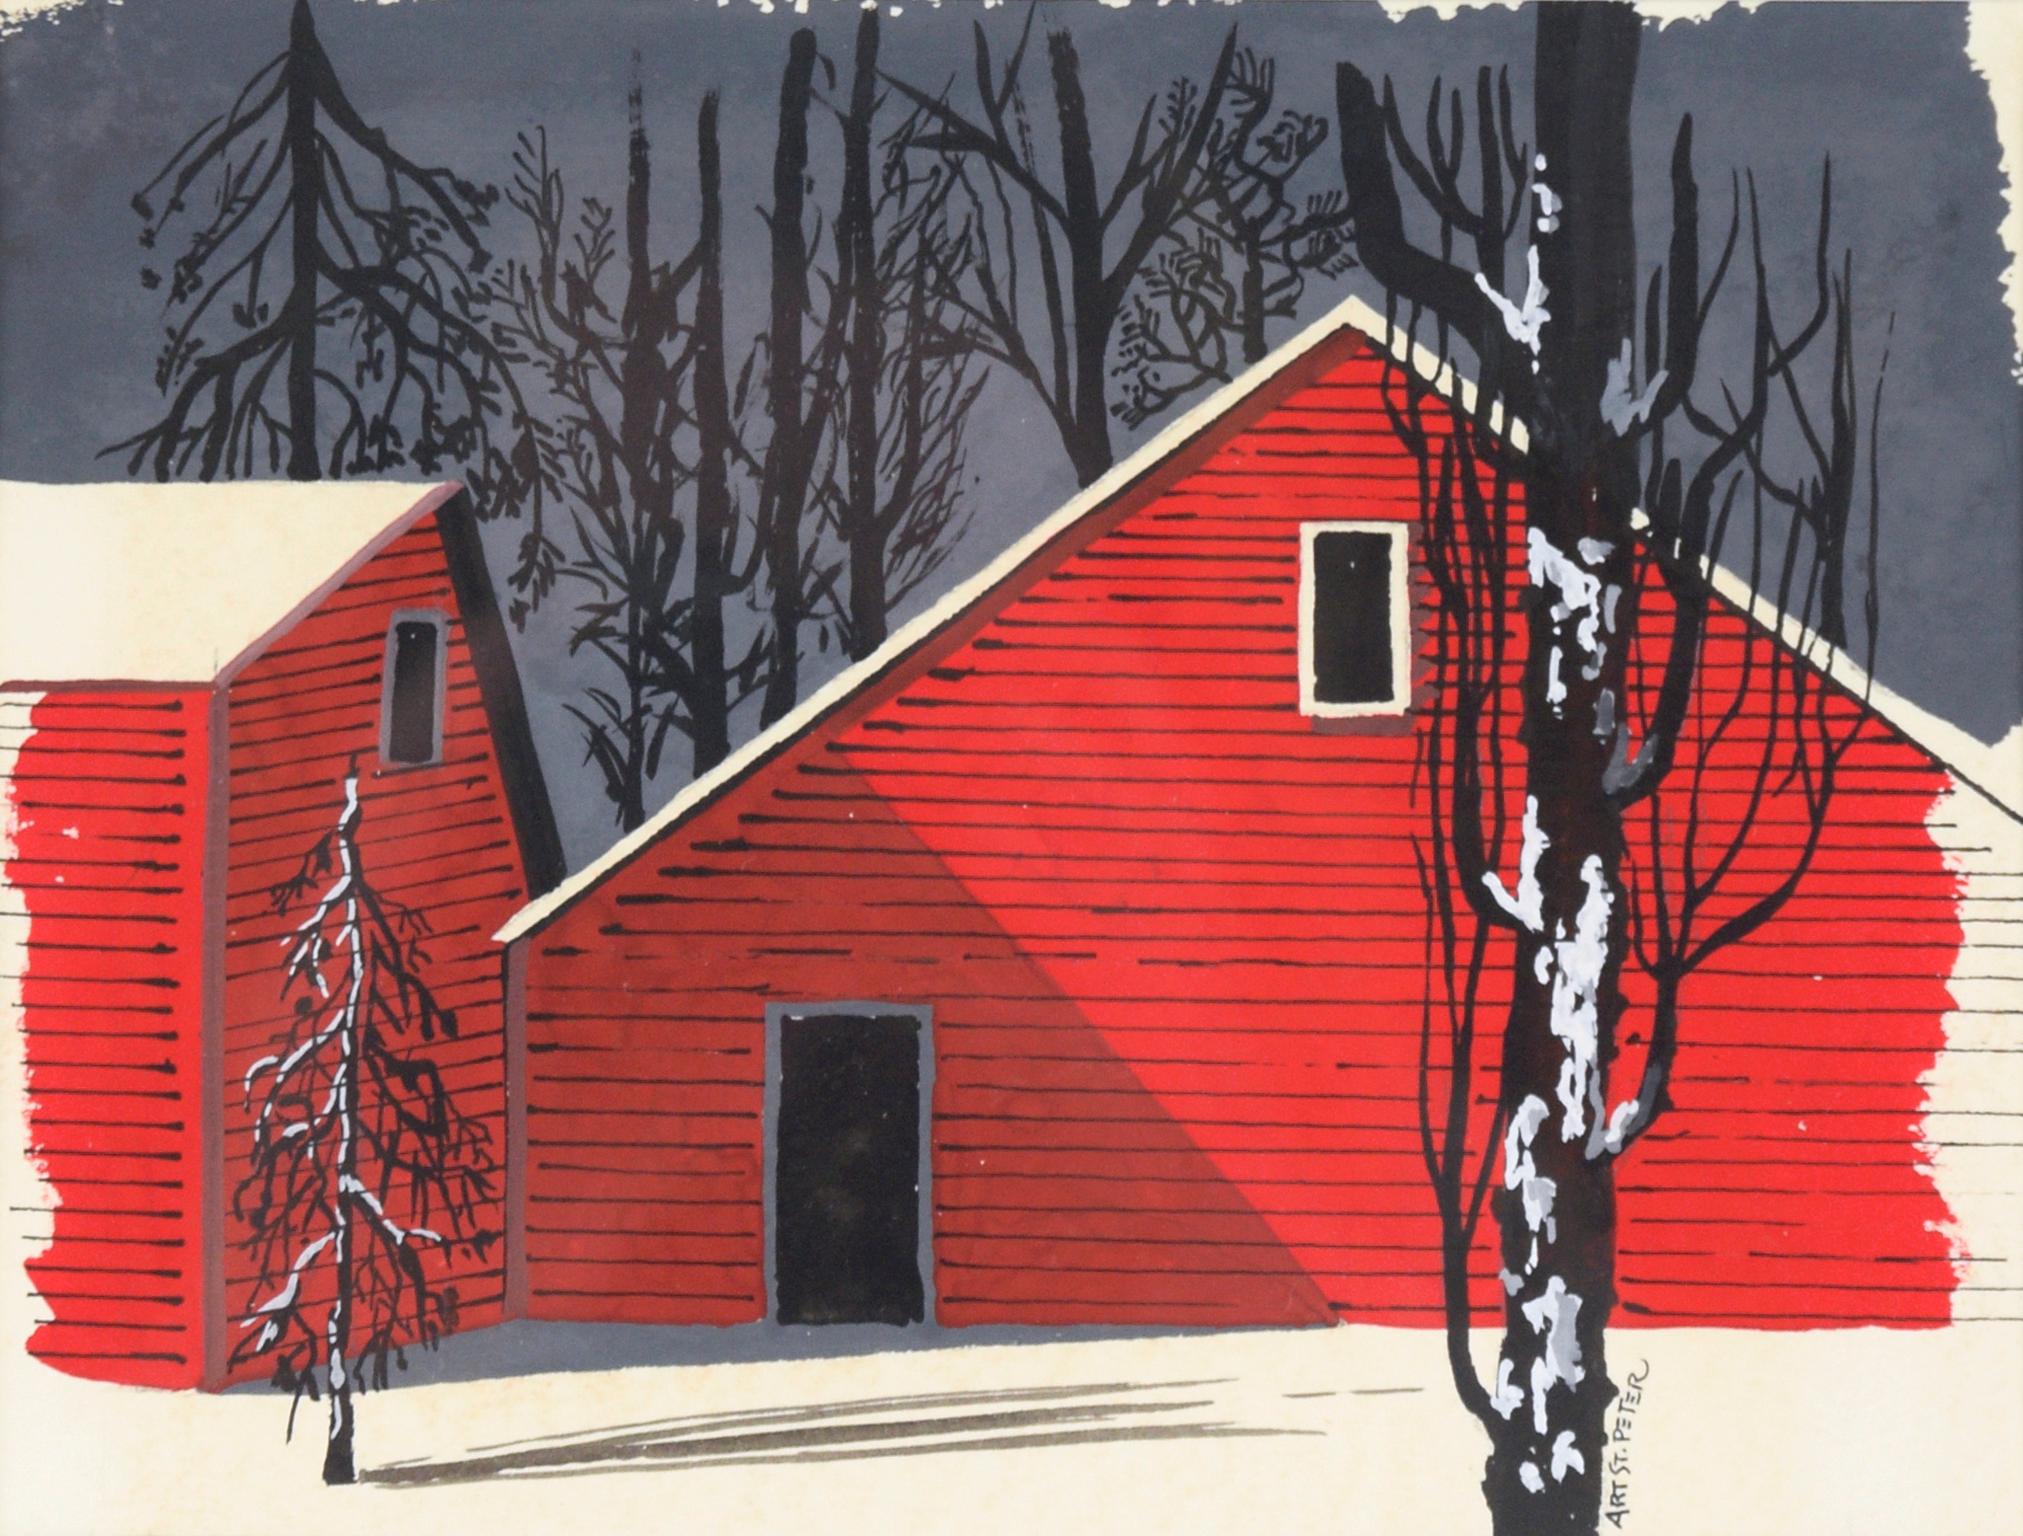 Red Barn in the Snow - Winter Landscape - Painting by Art St. Peter